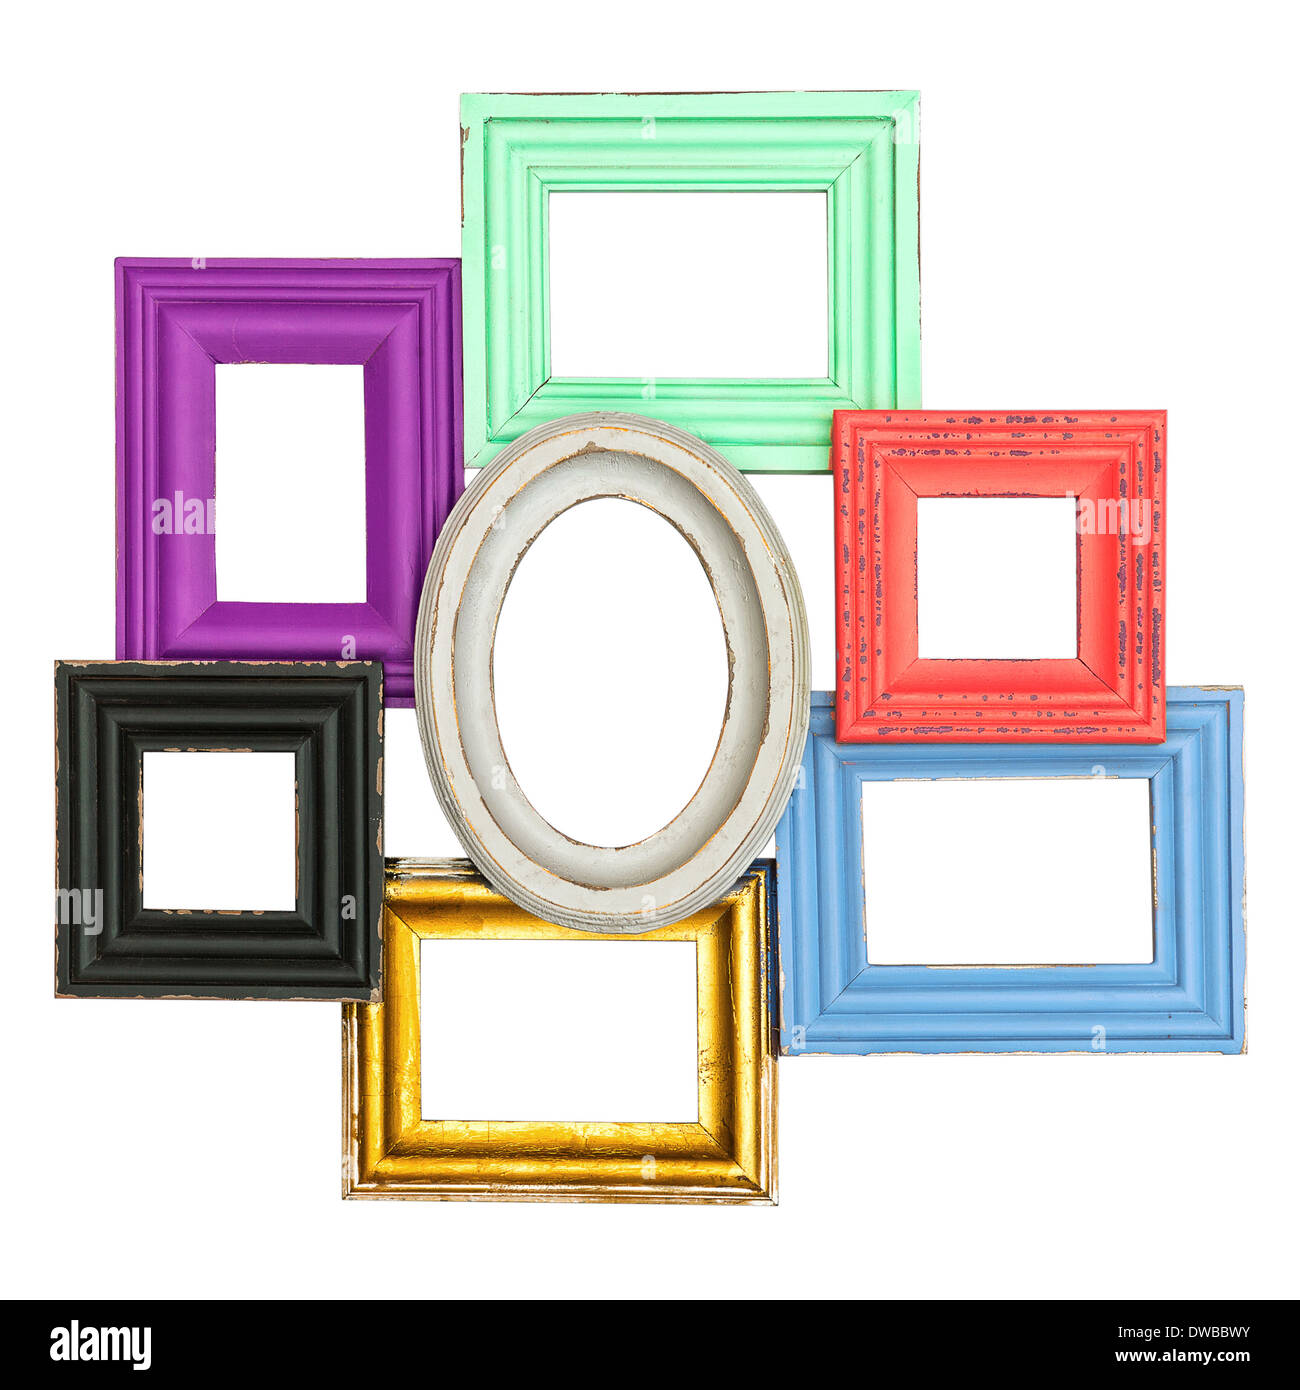 frames for photo and picture. vintage style framework Stock Photo